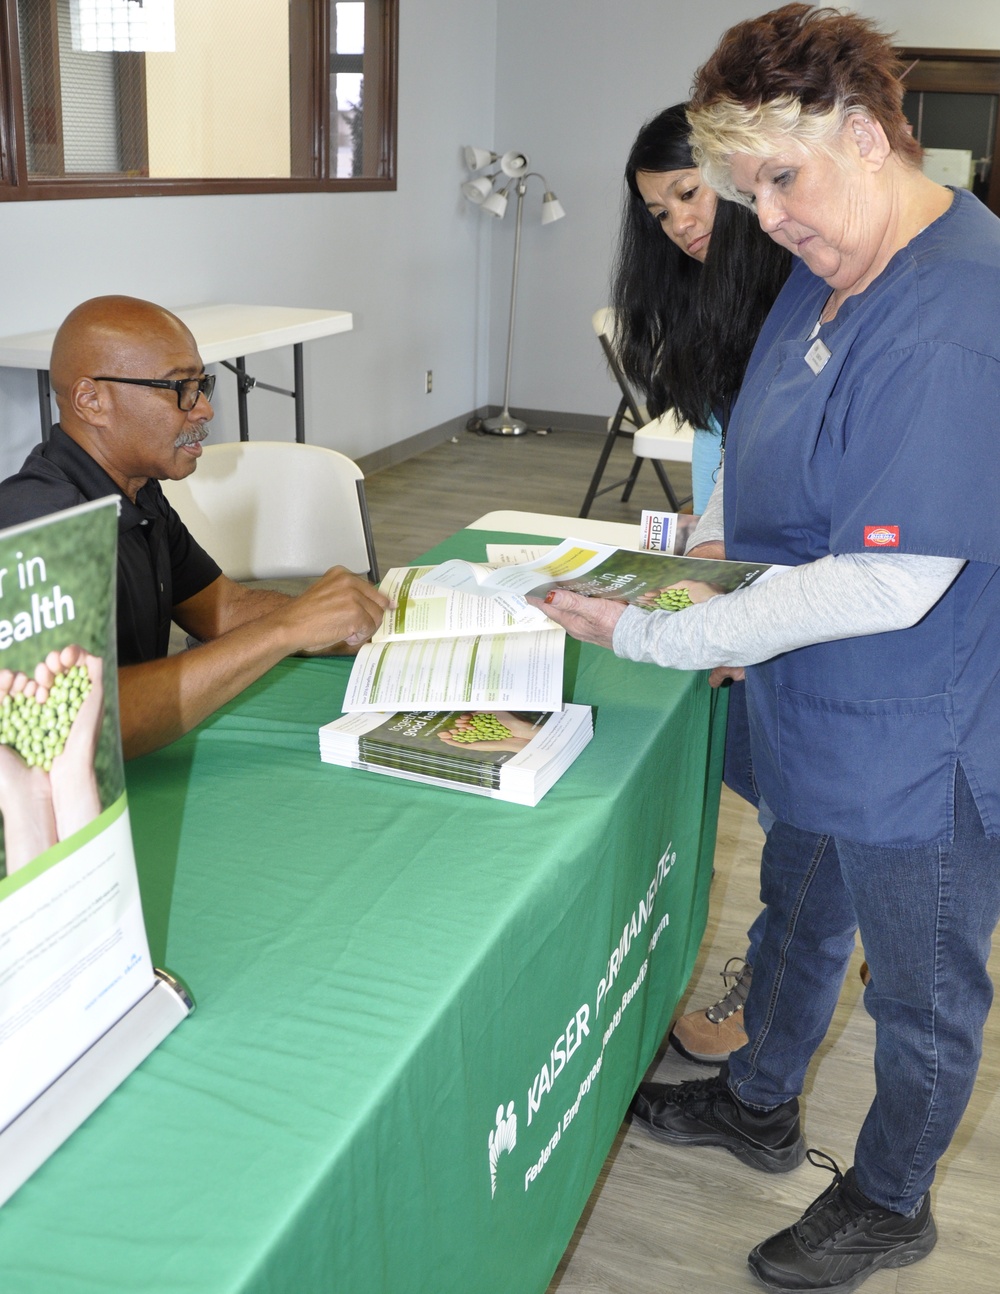 Dorothy Adams, lead store associate and Mercy Jauss, store associate, inquire about Kaiser Permanente benefits with Greg Campbell, Kaiser enroller during a Benefits Fair held aboard Marine Corps Logistics Base Barstow, Calif., Oct. 28